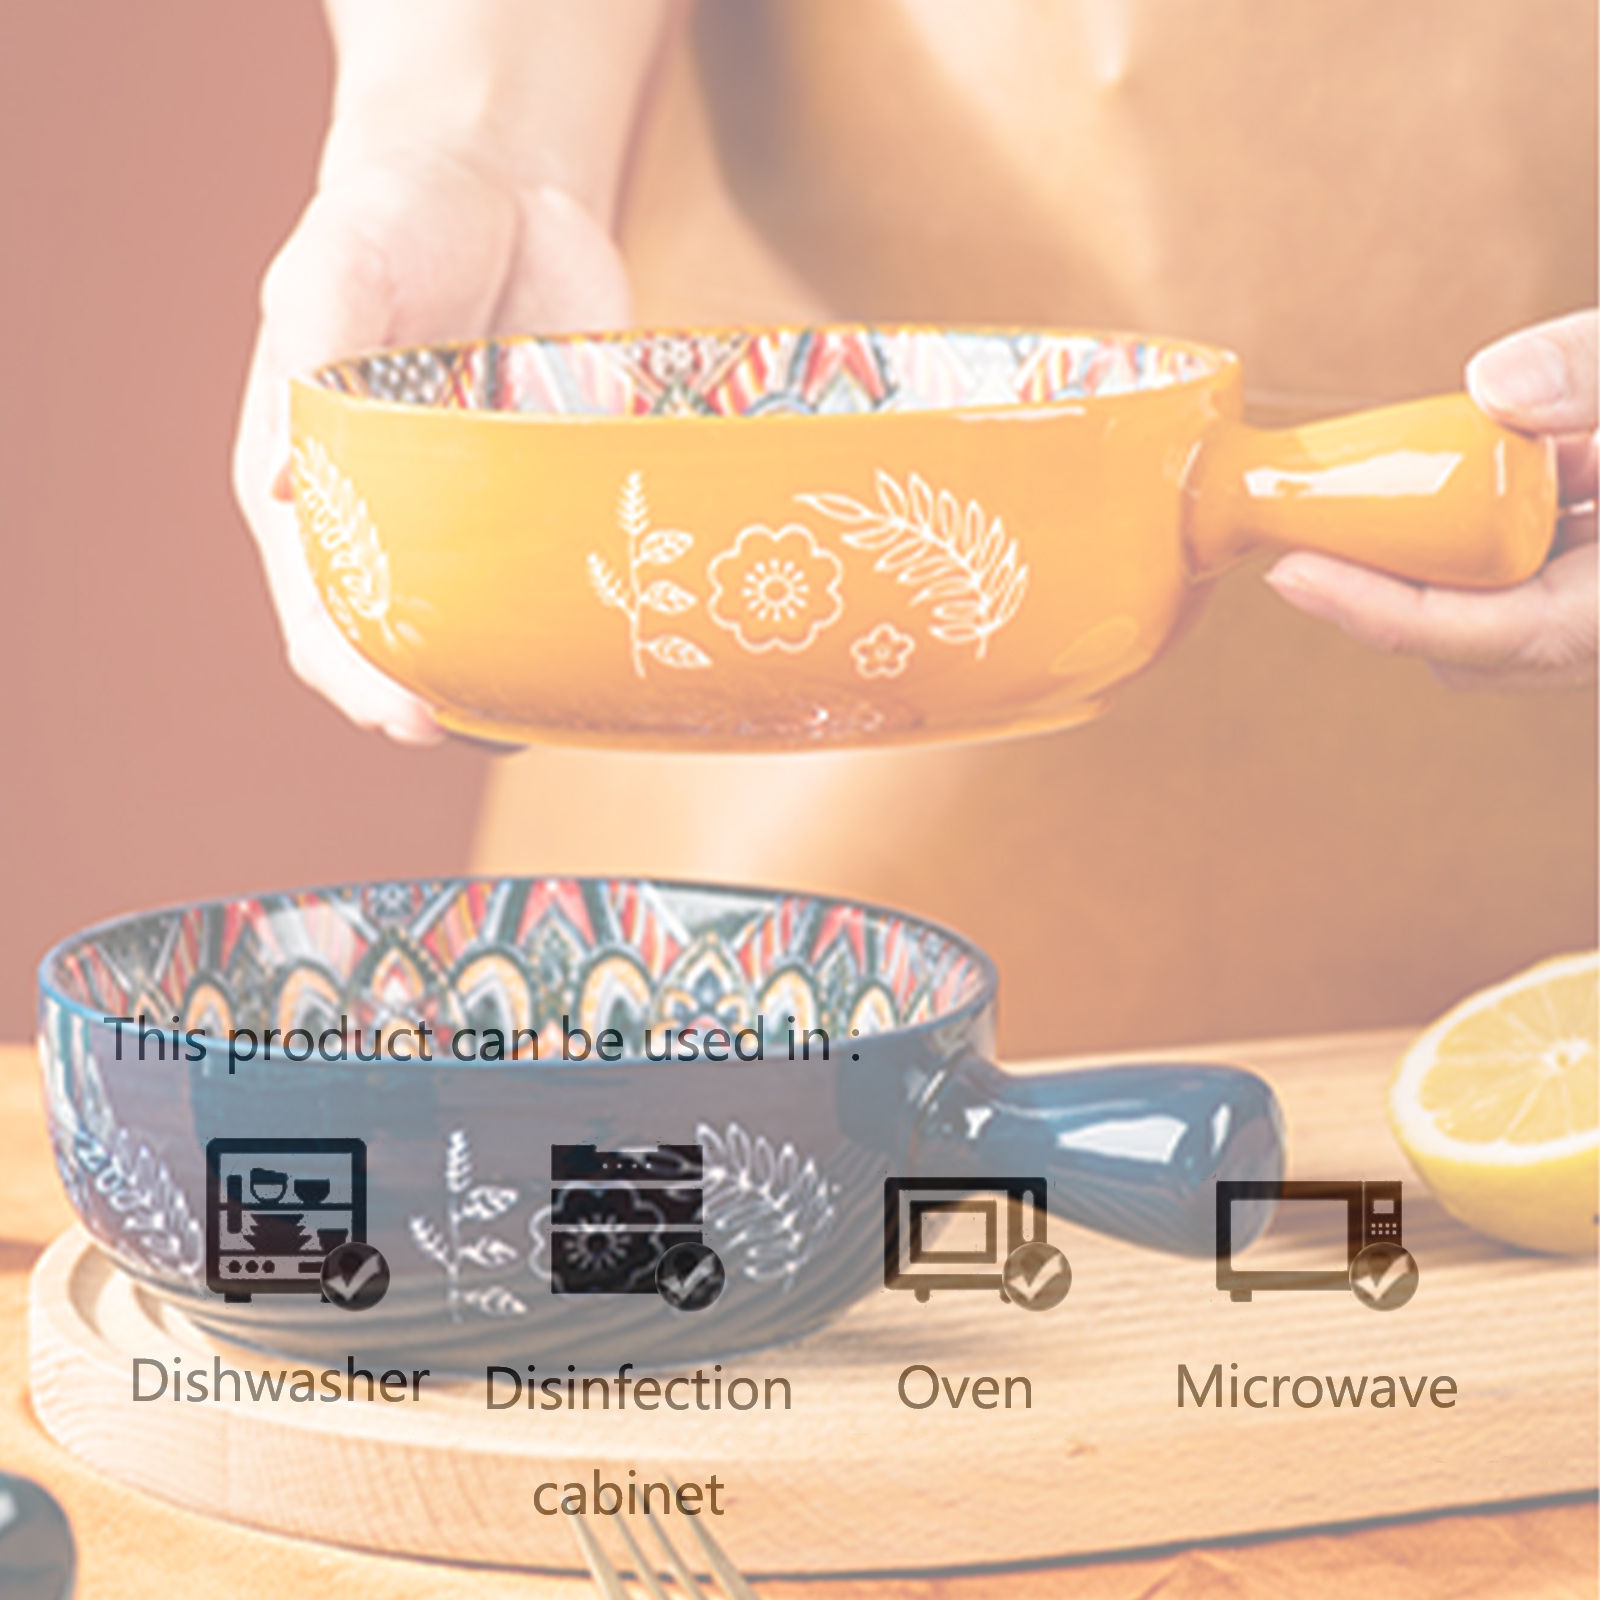 Qeeadeea Ceramic Soup Bowl With Handle 600ml, Single Shallow Bowl, Small Ramen Bowl, Microwave And Oven Safe-Orange-20x15x5.5cm - image 4 of 7